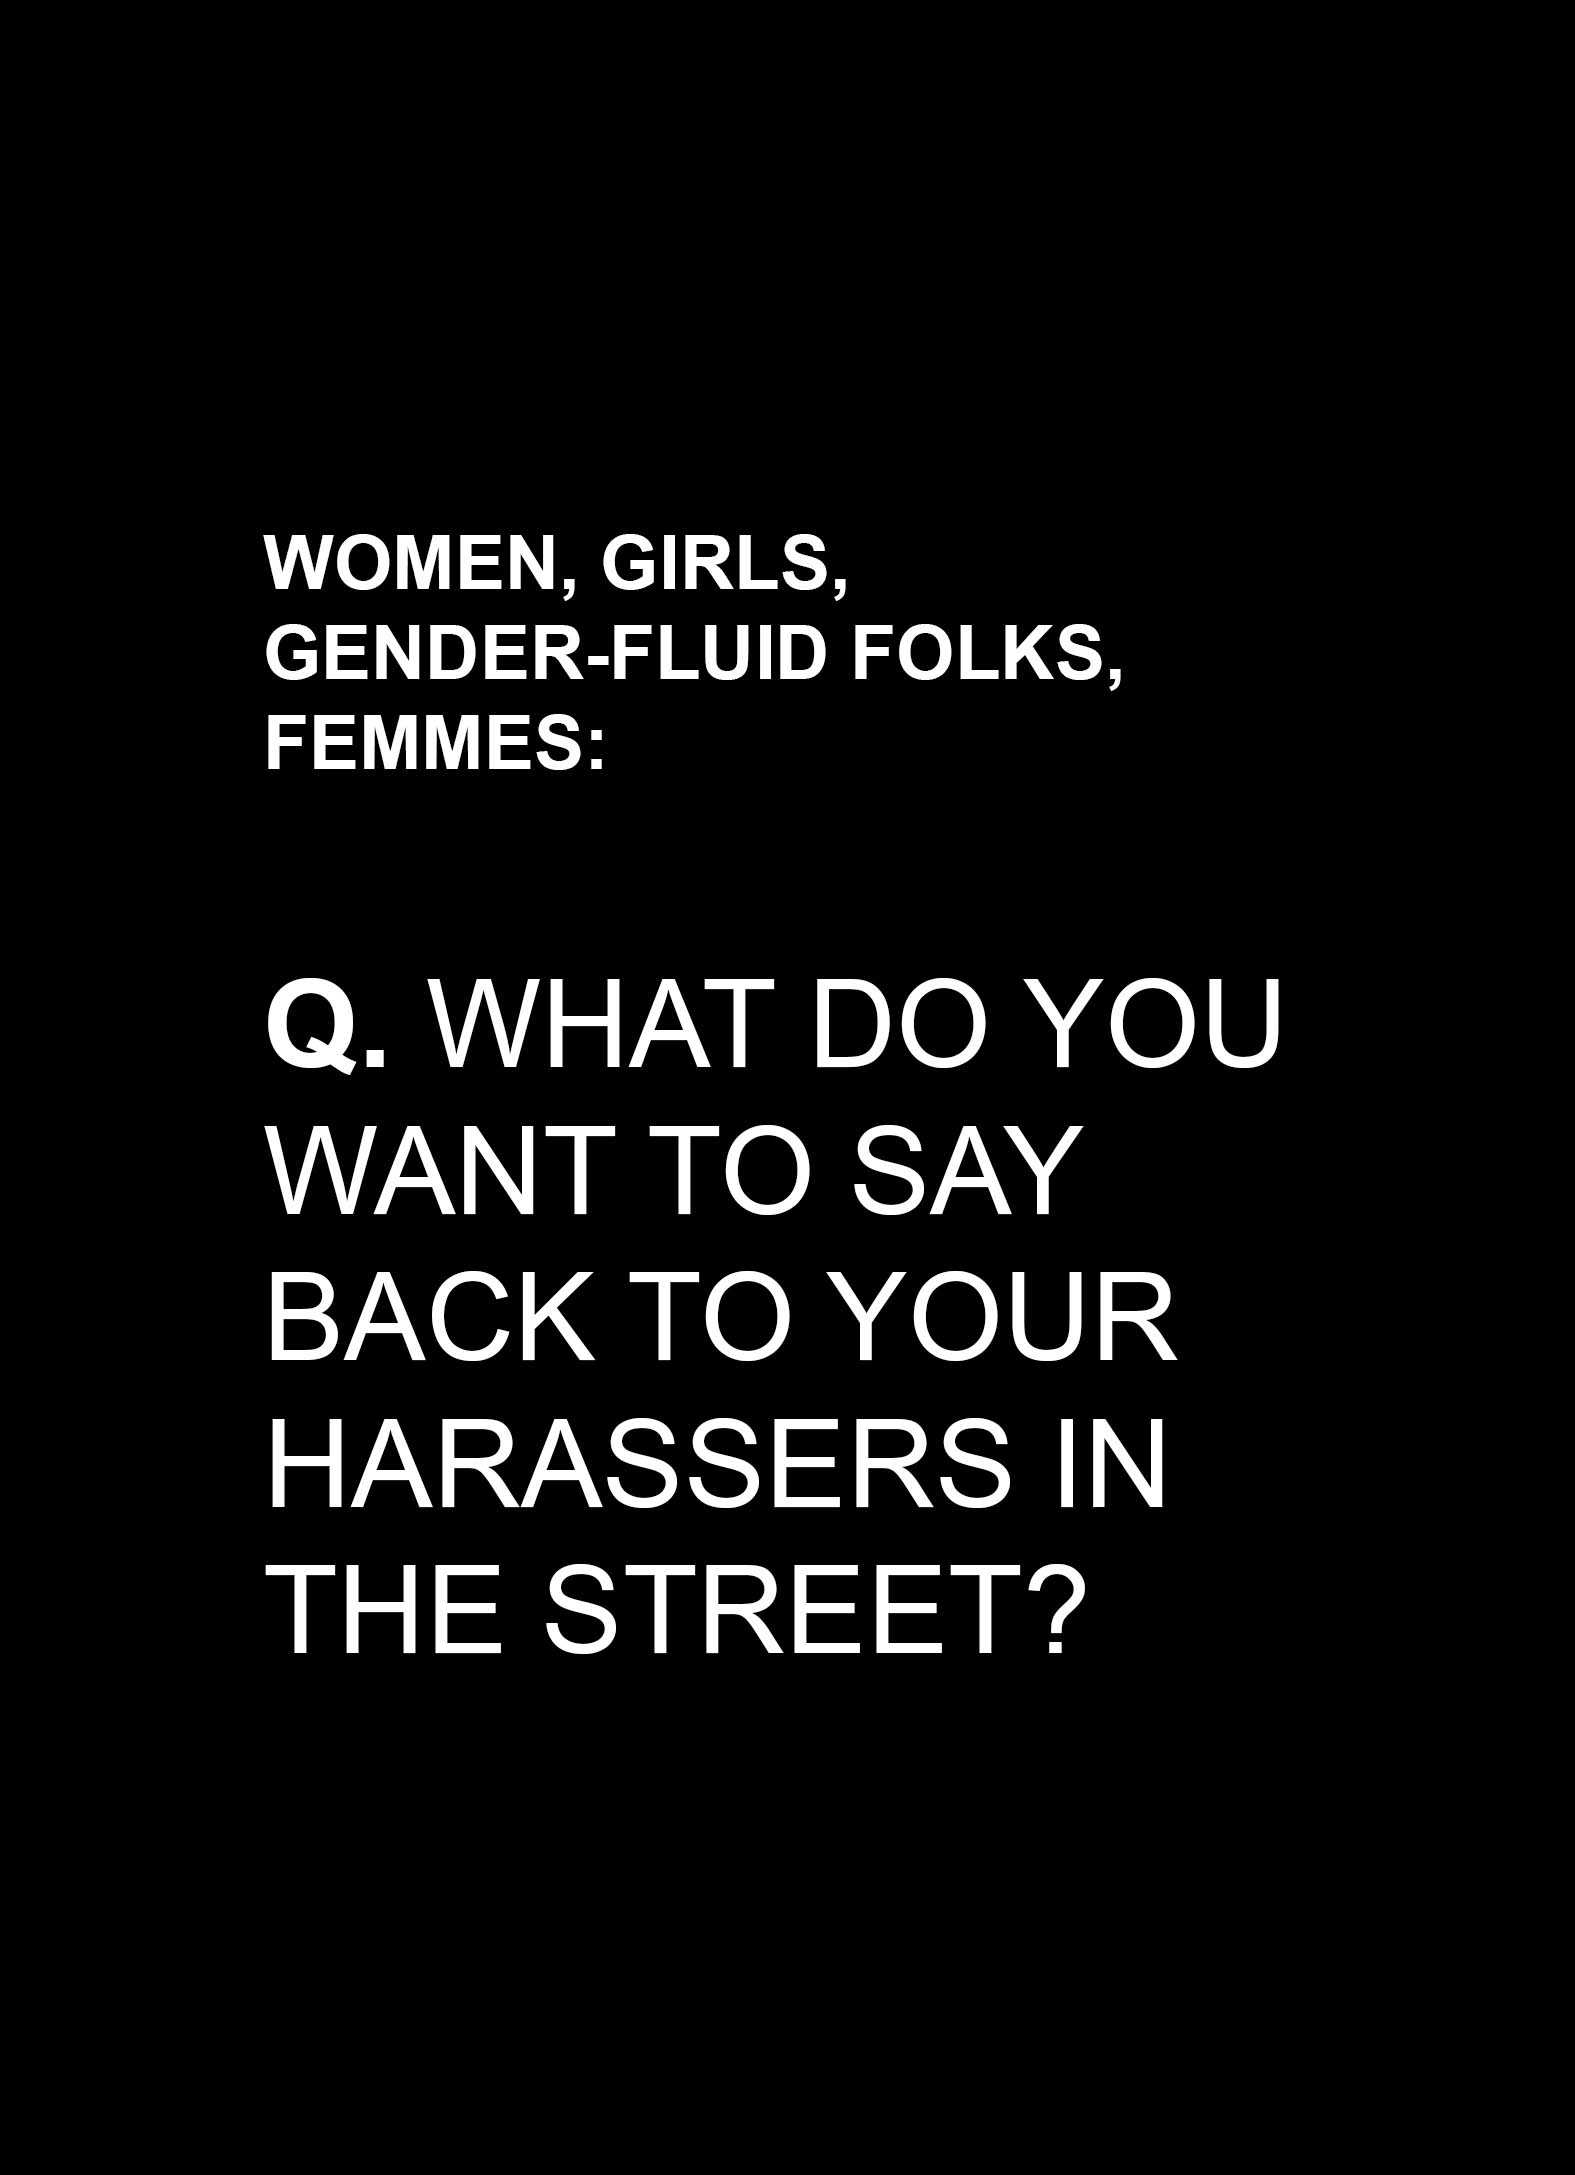 Women, girls, gender-fluid folks, femmes: Q. What do you want to say back to your harassers in the street?